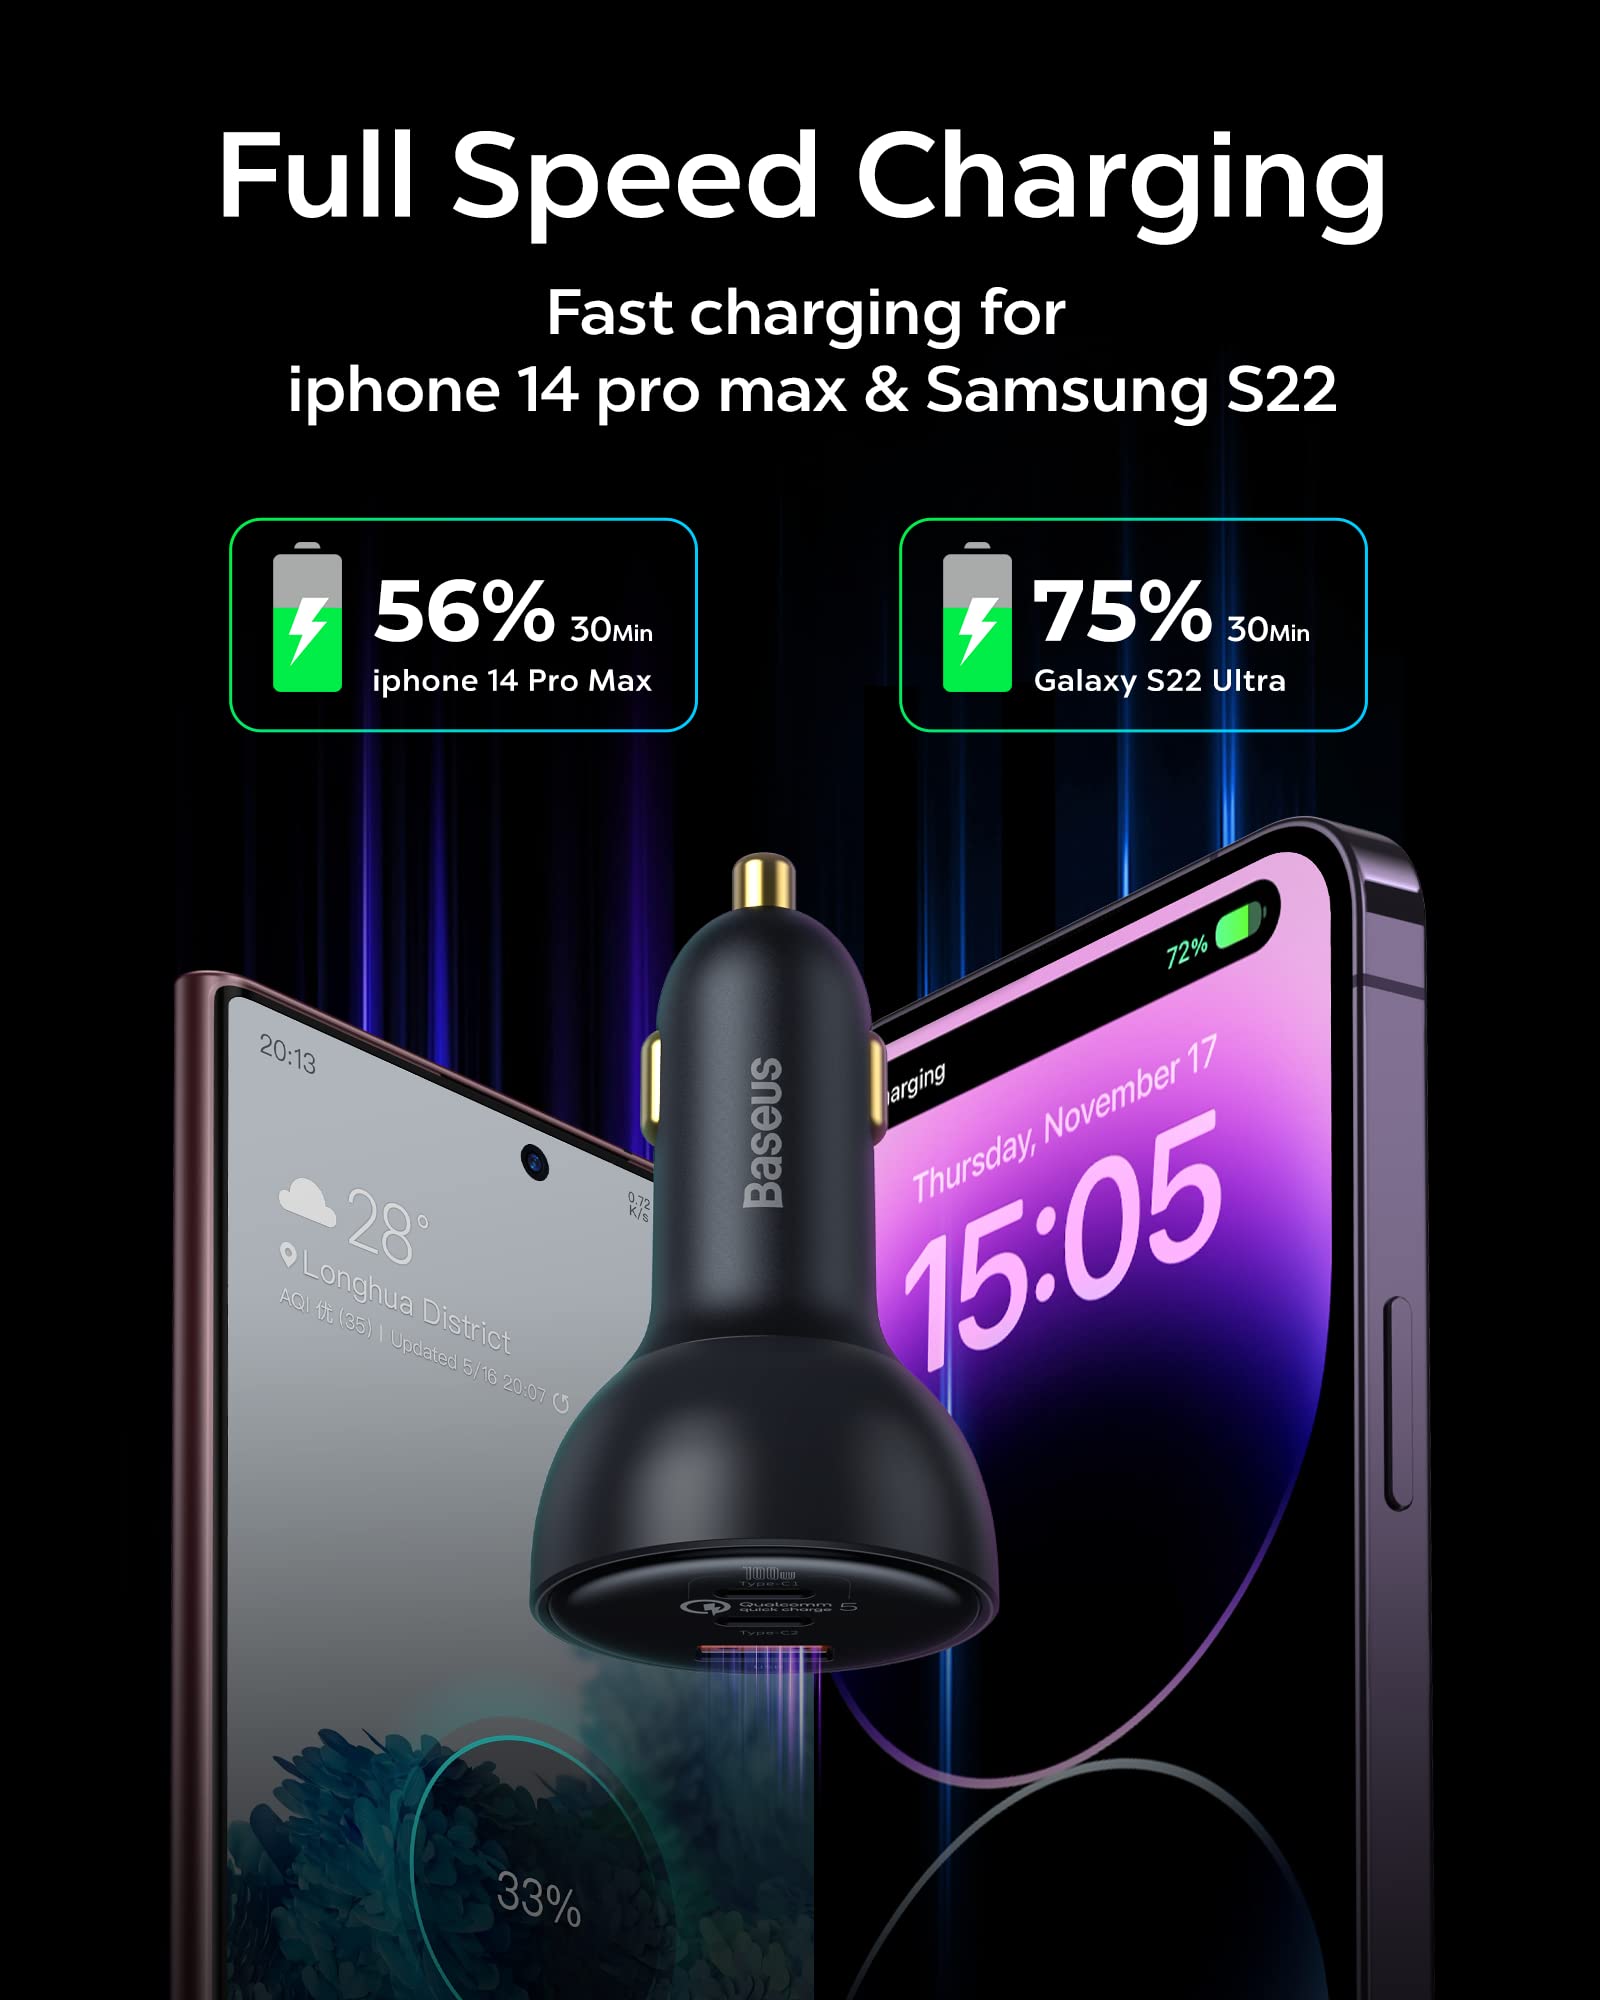 160W USB C Car Charger, Baseus Type C Car Charger, QC5.0 PD3.0 PPS 3 Ports Super Fast Charging Car Phone Charger Adapter for iPhone 14 13 12 Pro, Samsung S22 S21 iPad MacBook Pro Air Laptop Steam Deck